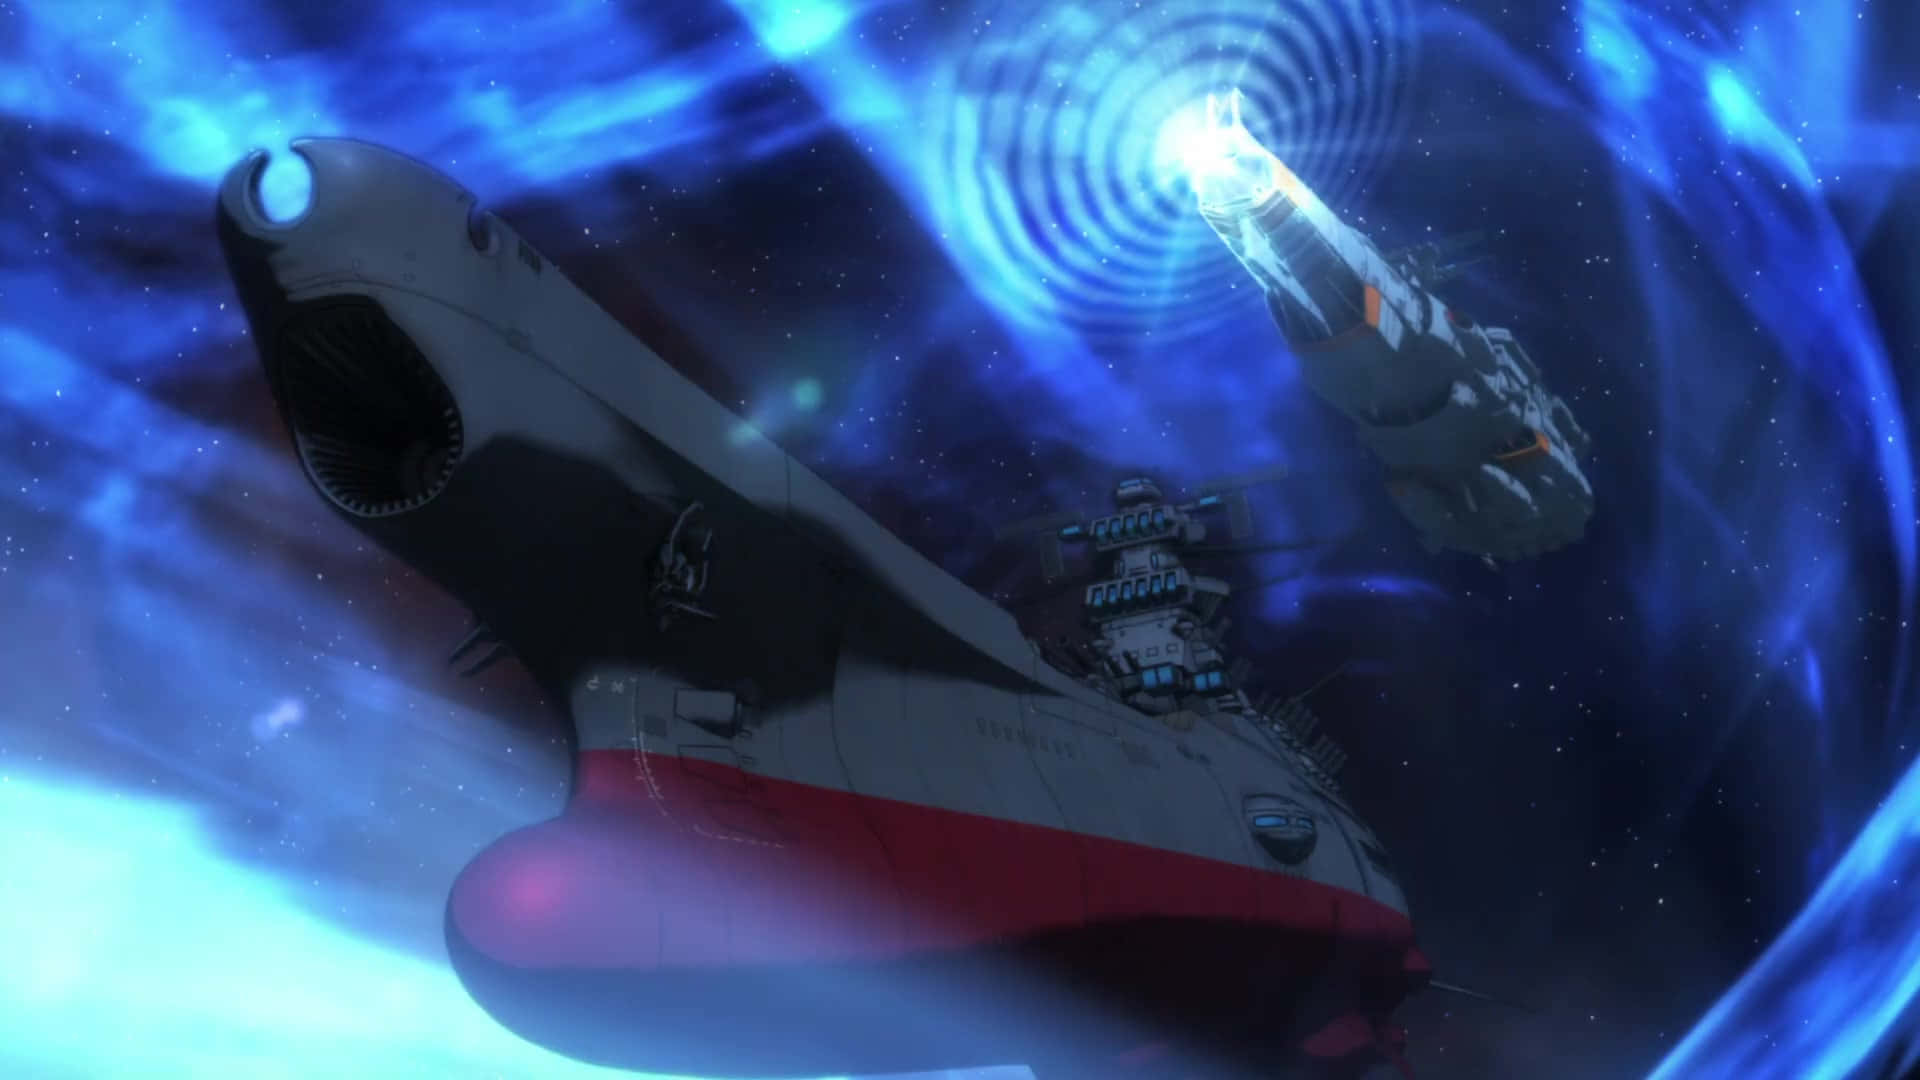 "The Iconic Space Battleship Yamato Ready for Battle" Wallpaper